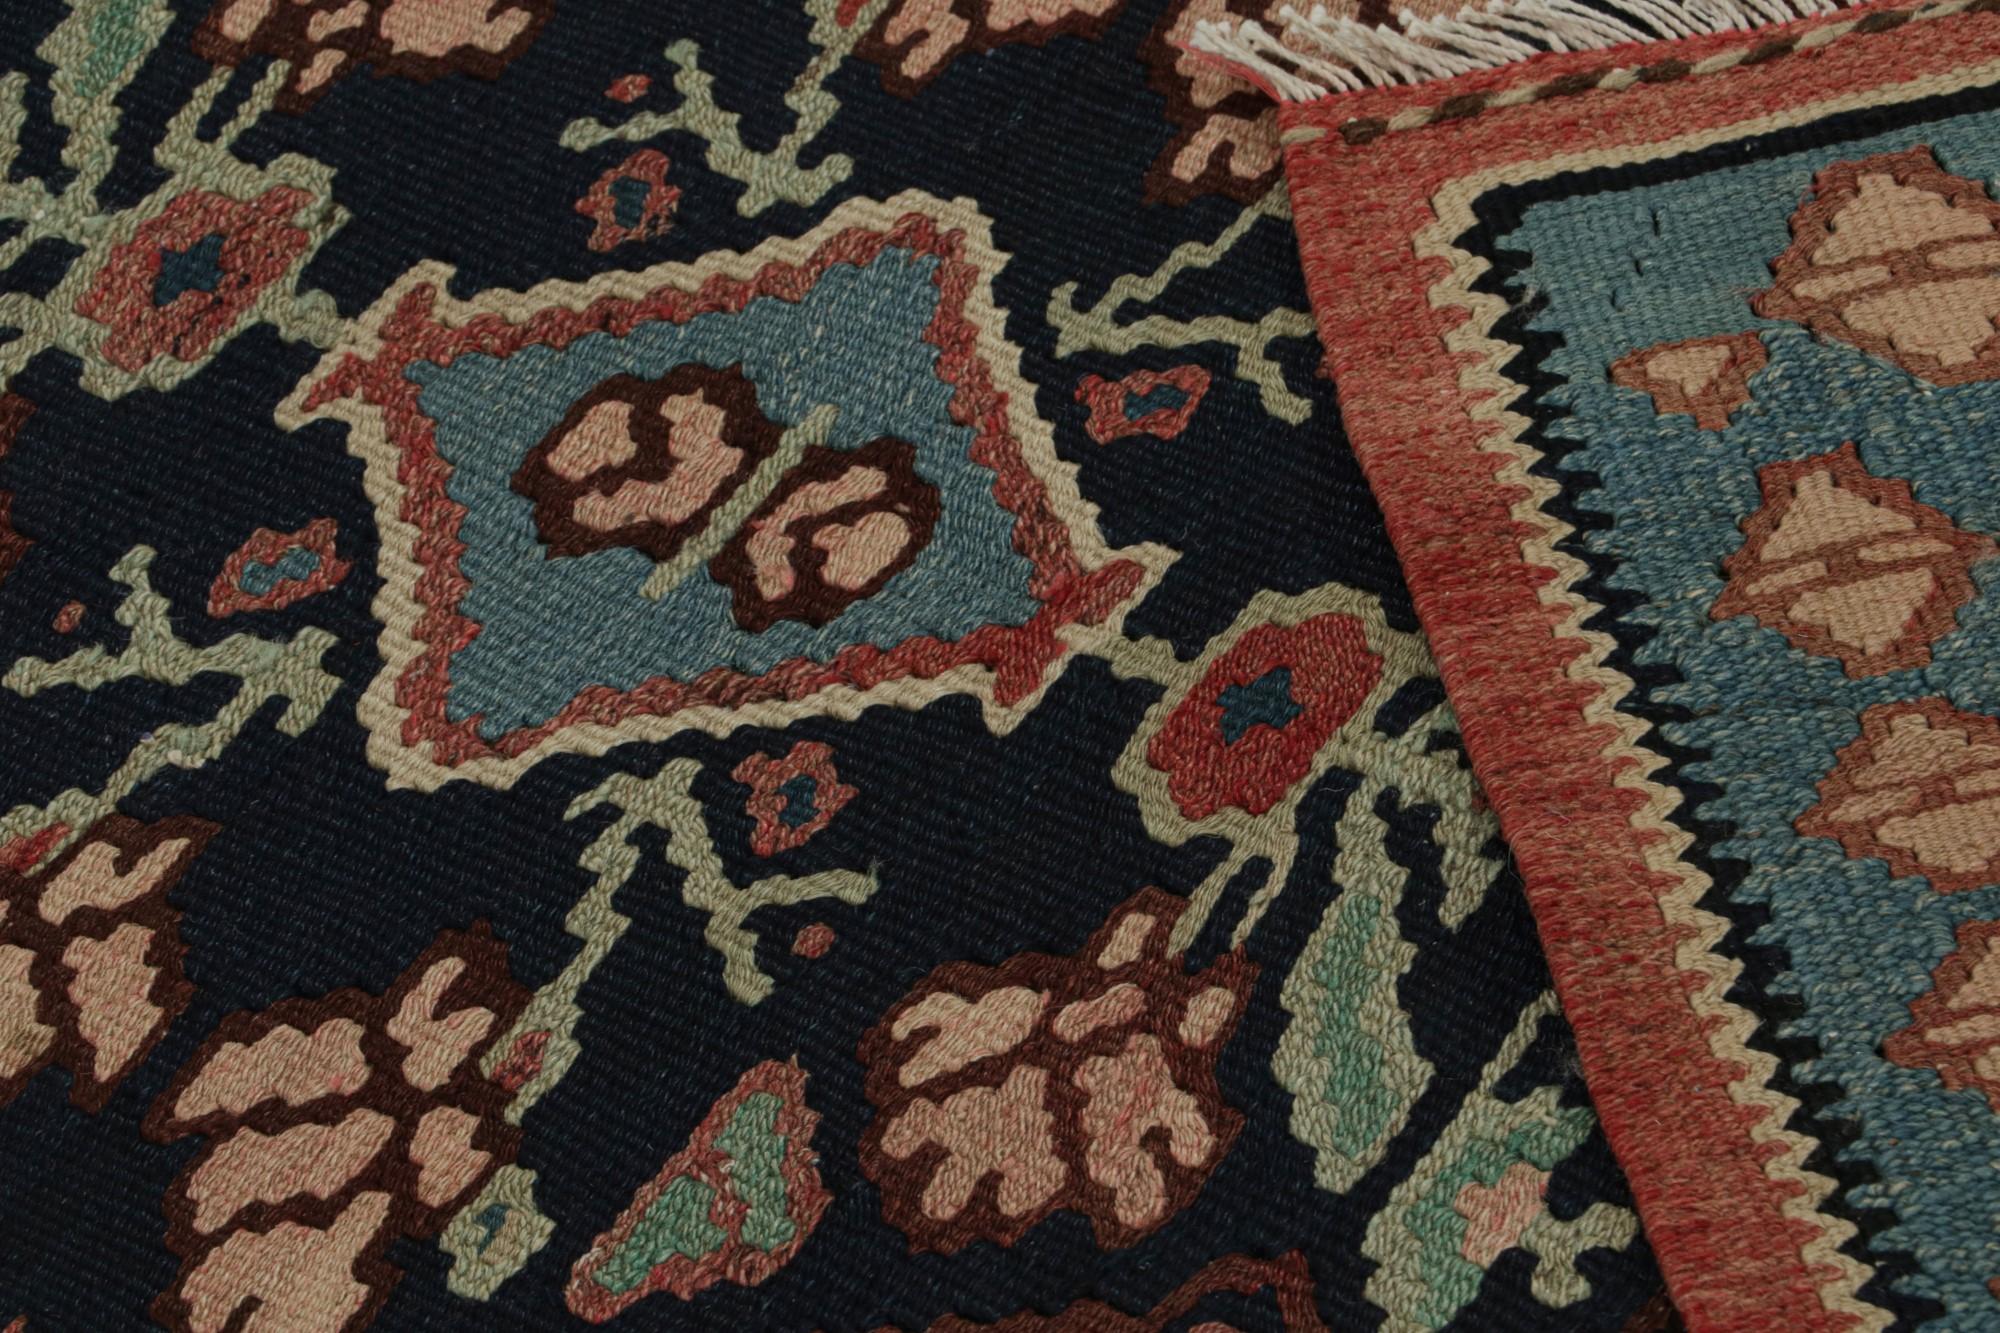 Wool Rug & Kilim’s Afghan Tribal Kilim with Medallions and Geometric Floral Patterns For Sale